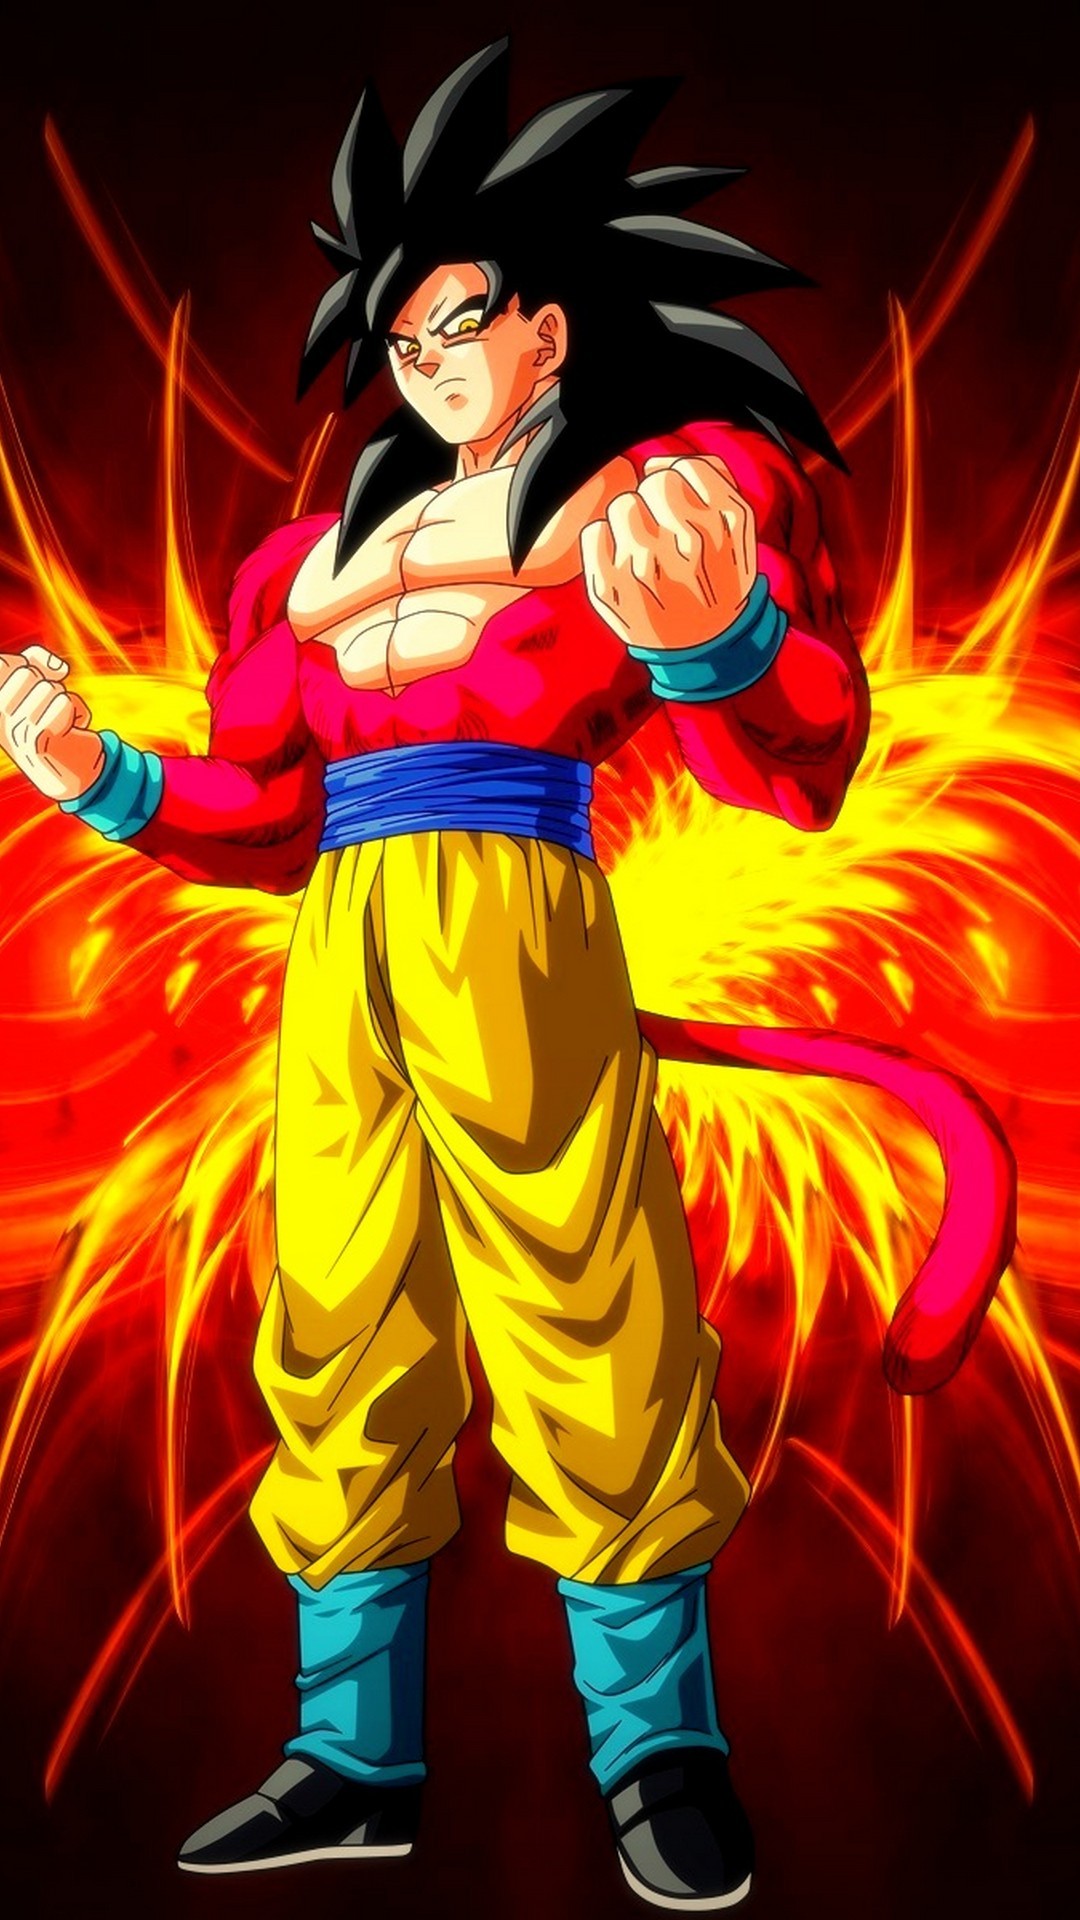 iPhone 8 Wallpaper Goku SSJ4 with resolution 1080X1920 pixel. You can make this wallpaper for your iPhone 5, 6, 7, 8, X backgrounds, Mobile Screensaver, or iPad Lock Screen